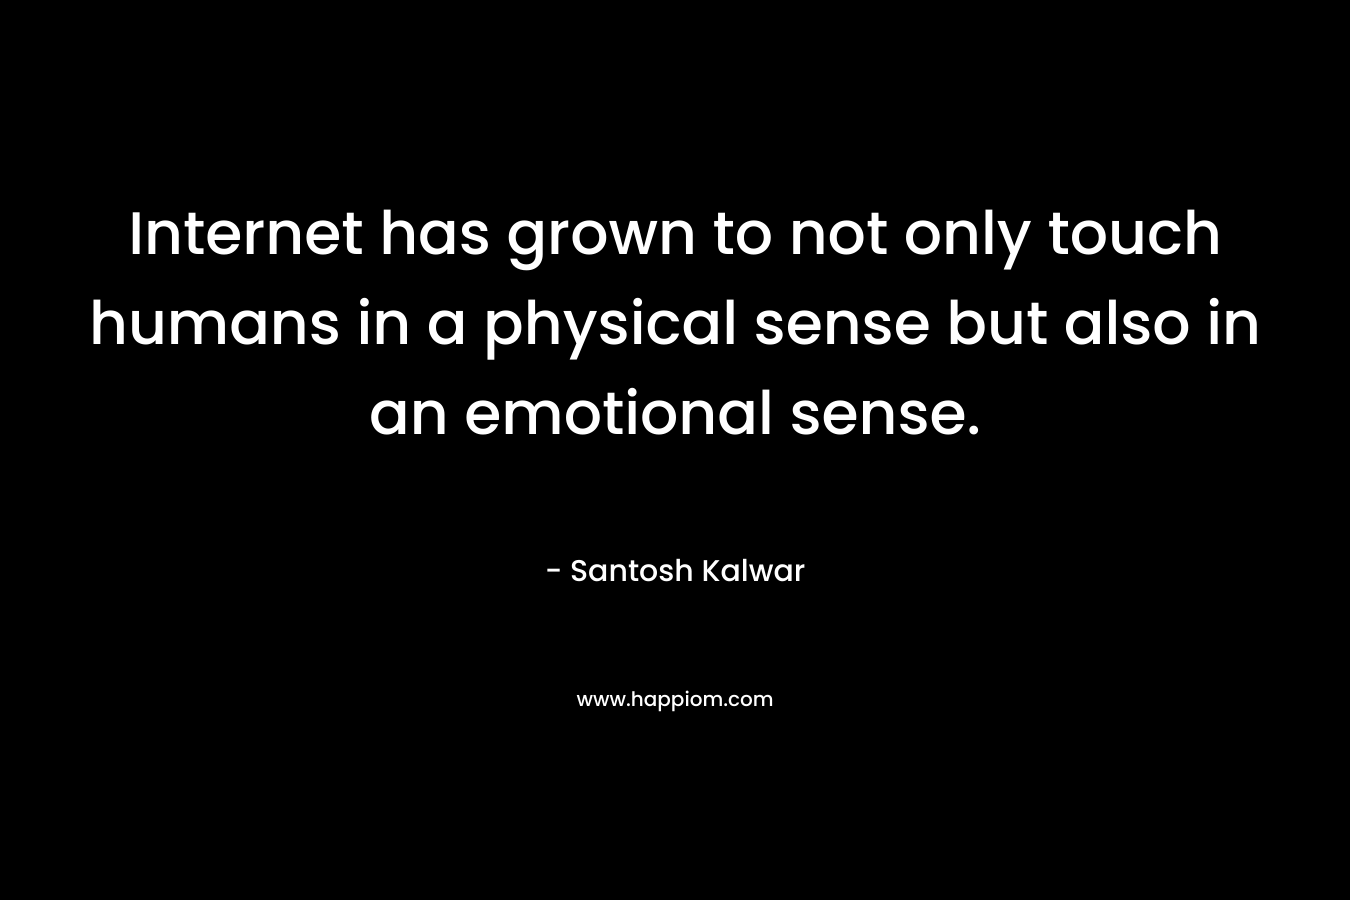 Internet has grown to not only touch humans in a physical sense but also in an emotional sense.